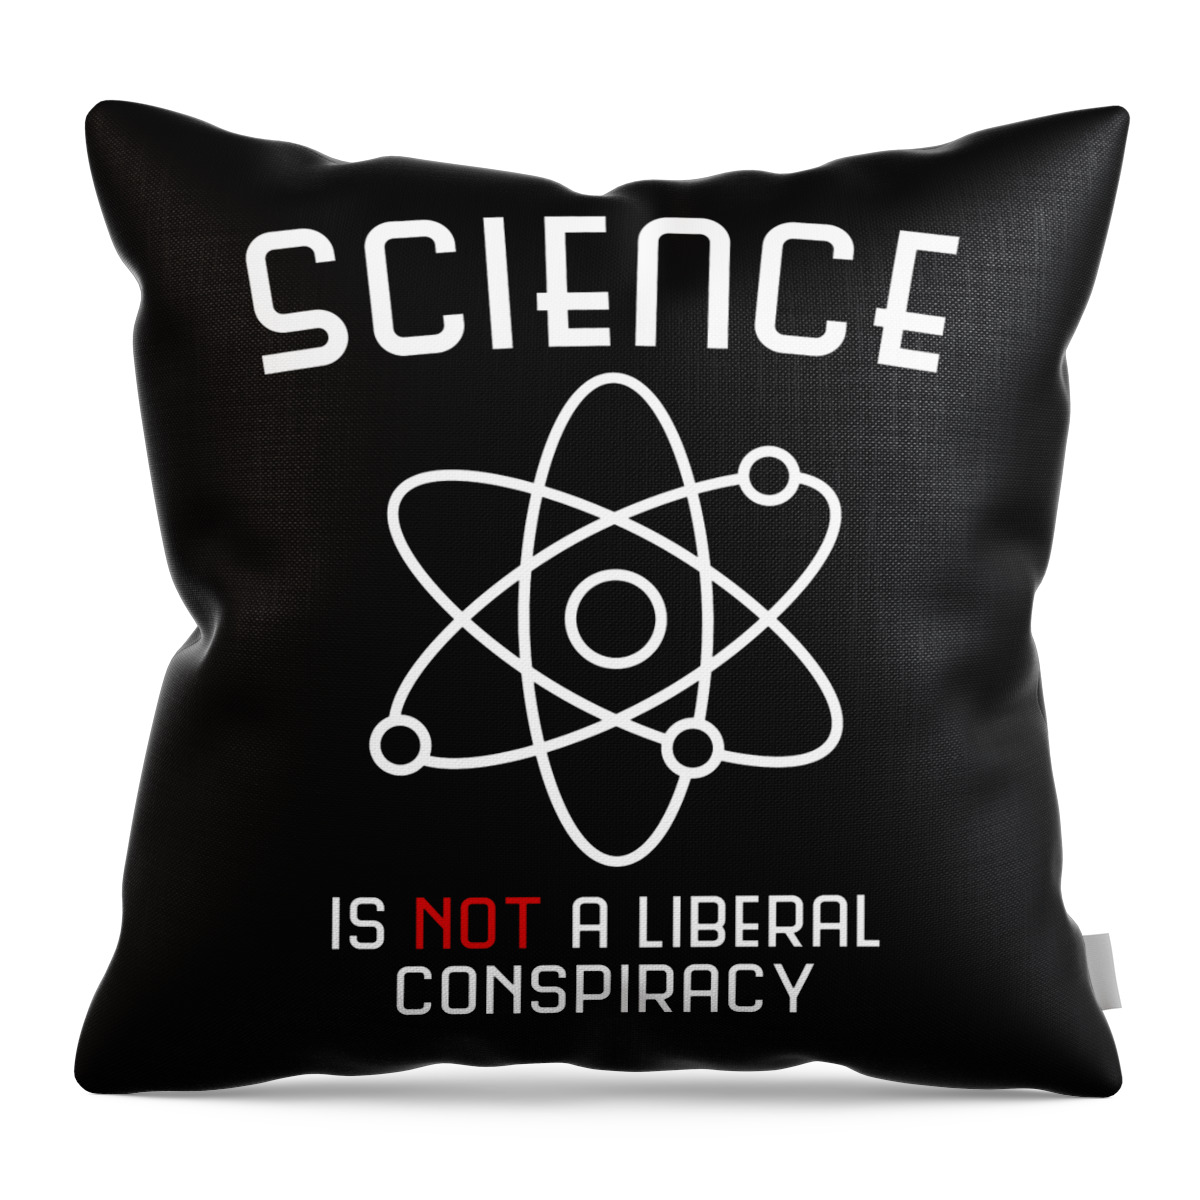 Cool Throw Pillow featuring the digital art Science Is Not A Liberal Conspiracy by Flippin Sweet Gear